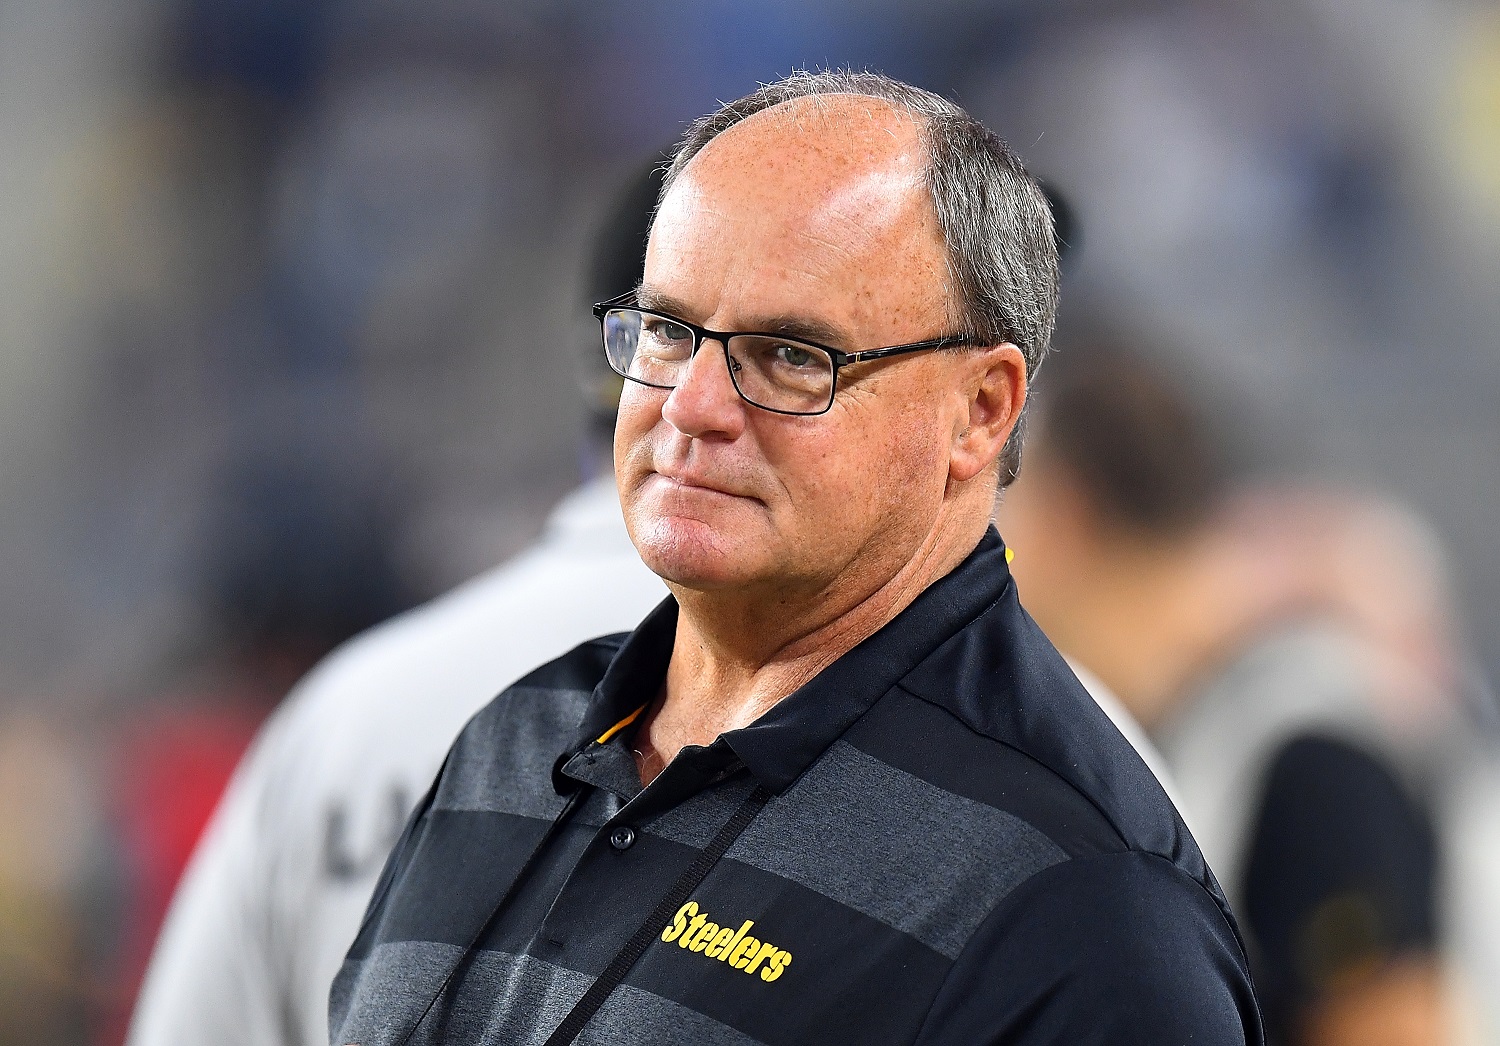 General manager Kevin Colbert of the Pittsburgh Steelers looks on prior to the game against the Cincinnati Bengals at Heinz Field on Sept. 30, 2019, in Pittsburgh.